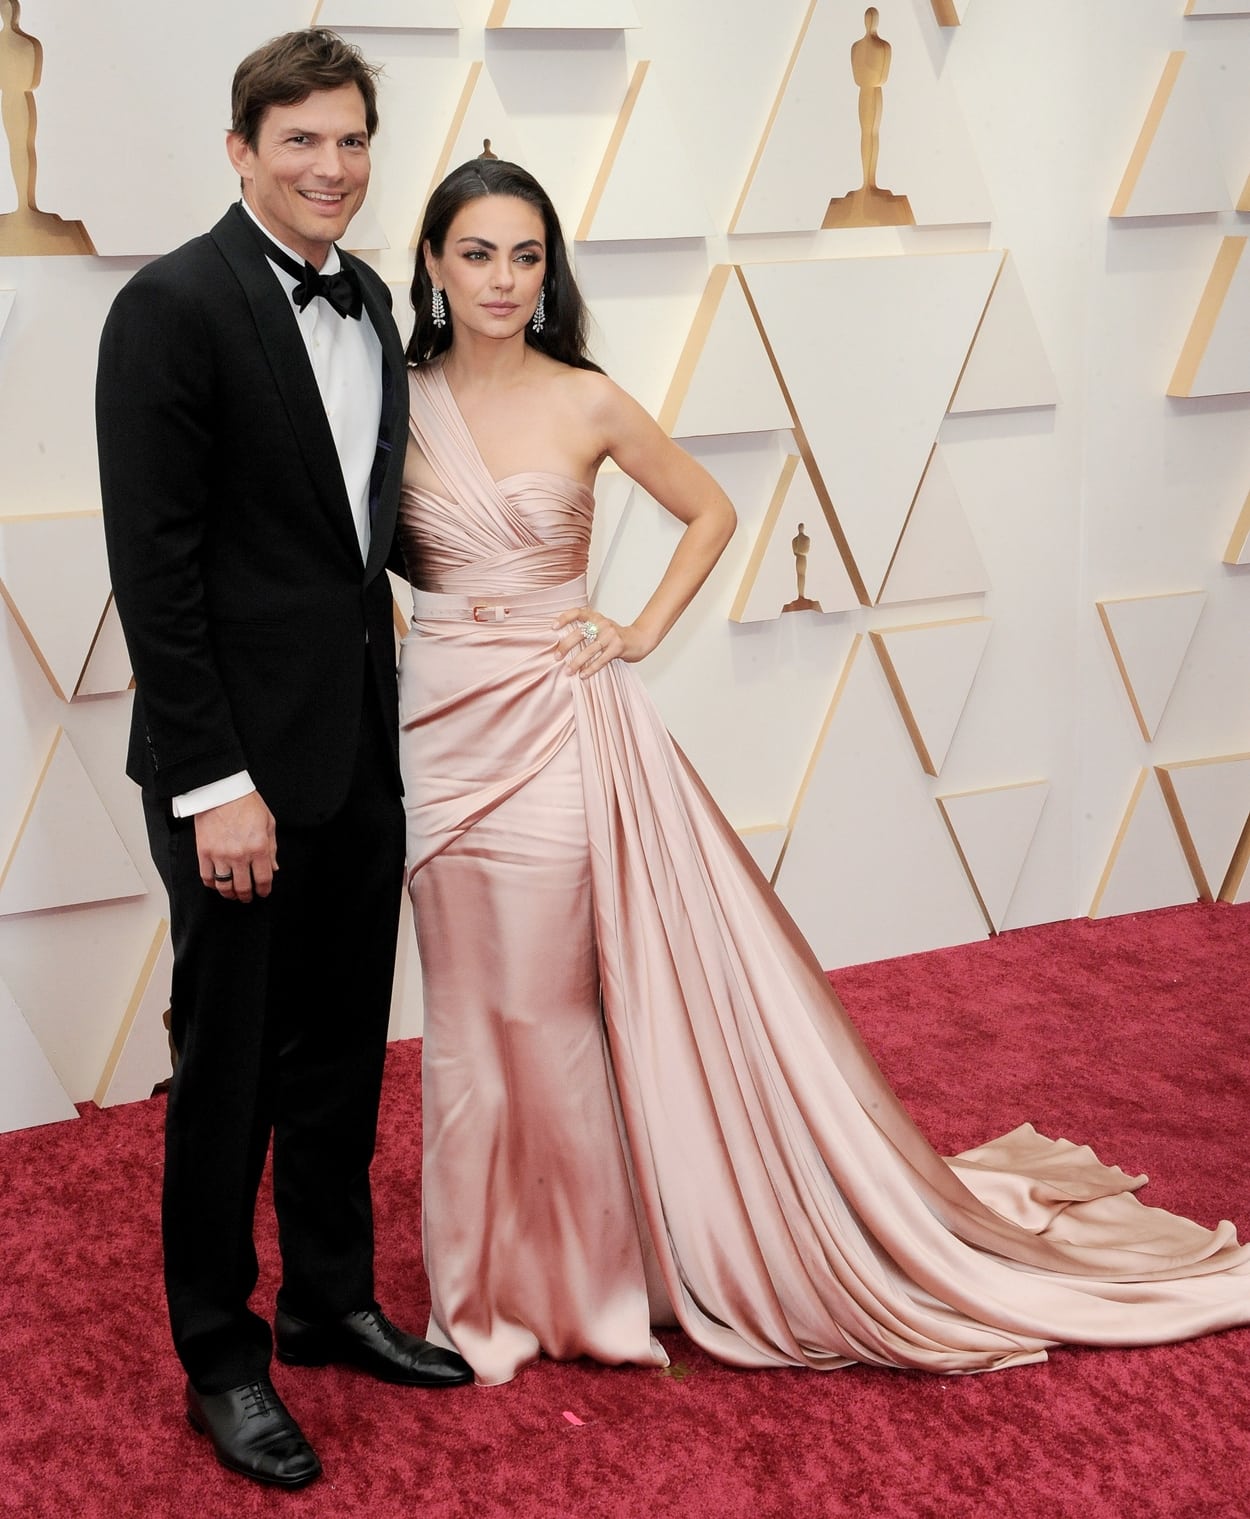 Ashton Kutcher in a black suit and Mila Kunis in a light pink belted Zuhair Murad dress at the 94th Annual Academy Awards